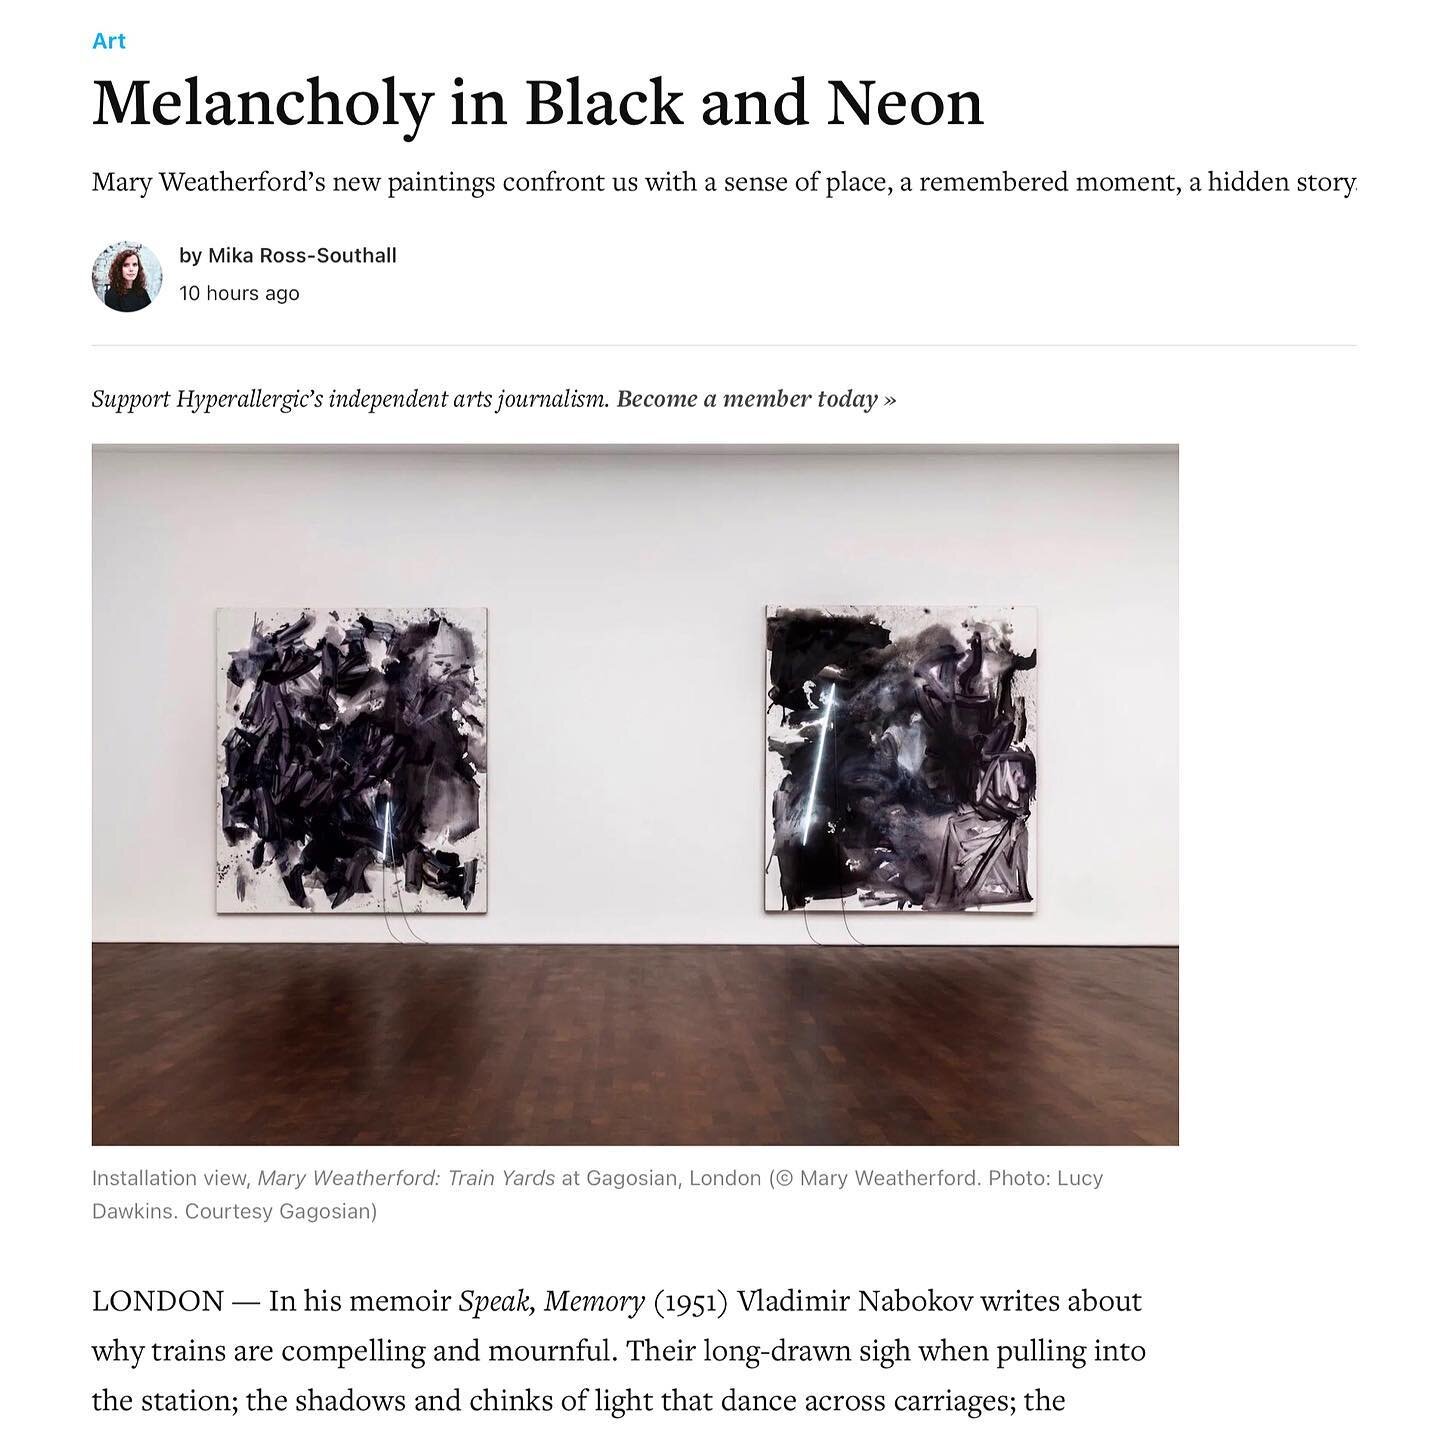 I wrote a piece for @hyperallergic about Mary Weatherford&rsquo;s huge, melancholic black and neon paintings at the @gagosian ◼️◽️◼️◽️◼️ Link to the piece on my website in bio
.
.
.
#mika_ross_southall #studio #hyperallergicmagazine #culturaljournali